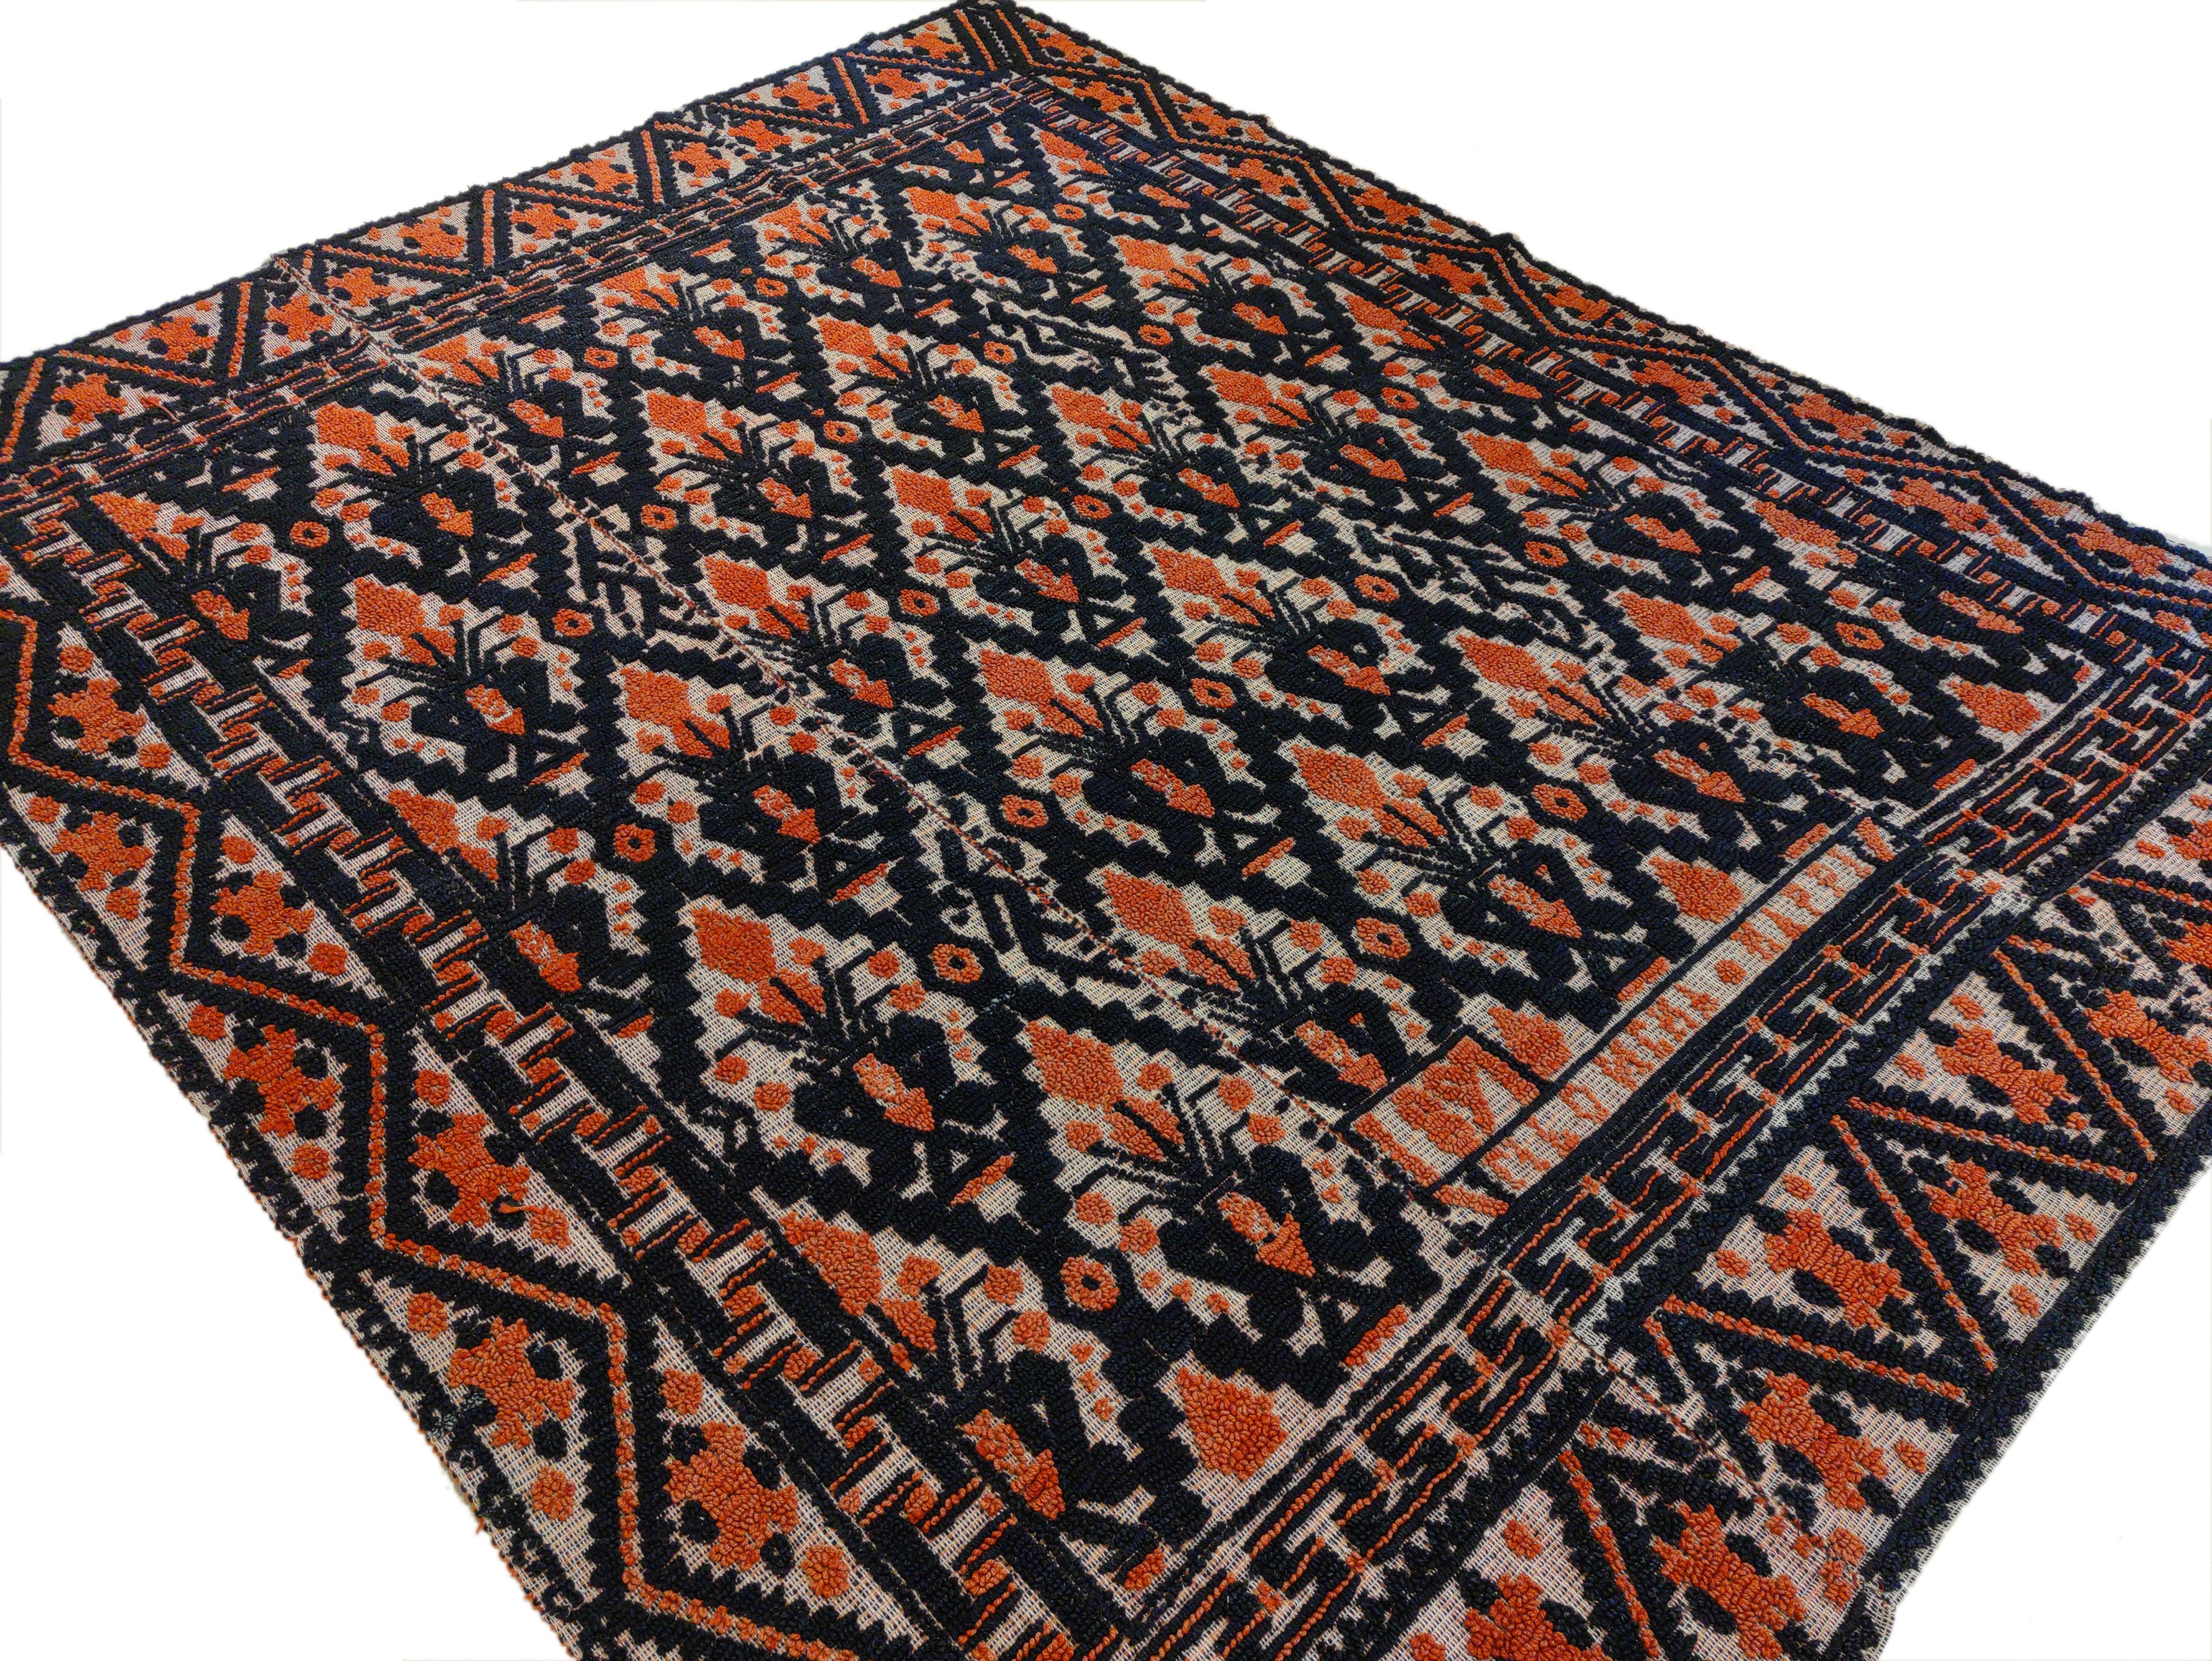 Alpujarra rugs were traditionally woven between the 15th and the 19th centuries in the villages of the Alpujarra district, located in southern Spain in the Granada region. These are woven in wool on a linen foundation by means of a loop pile